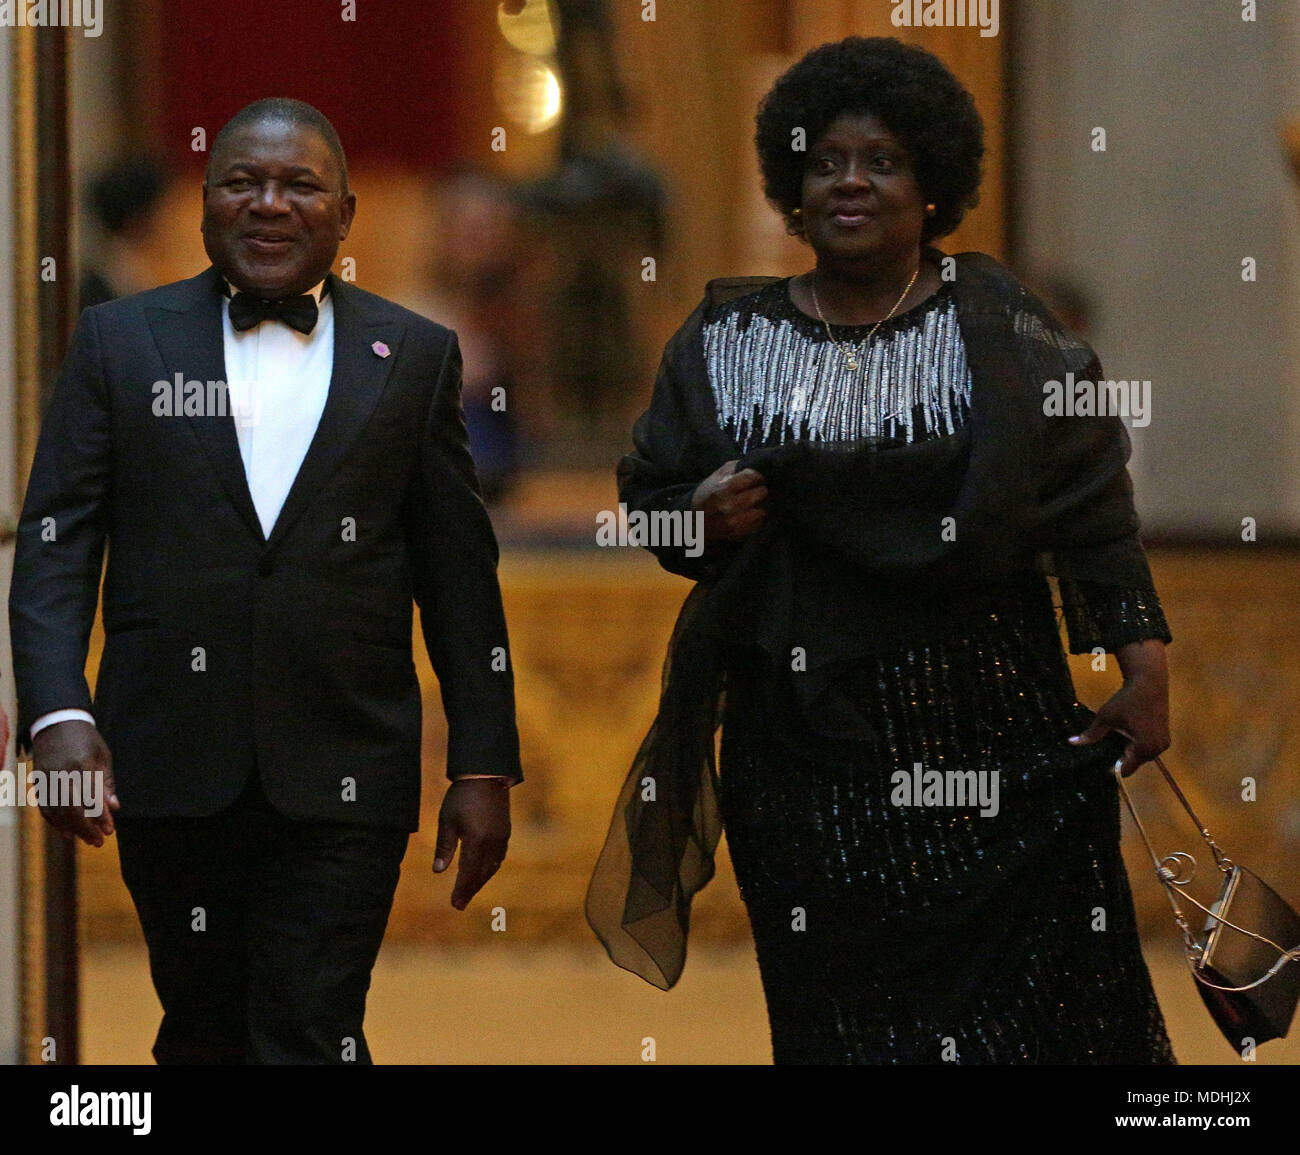 Mozambique's President Filipe Nyusi and his wife Isaura arrive in the East Gallery at Buckingham Palace in London as Queen Elizabeth II hosts a dinner during the Commonwealth Heads of Government Meeting. Stock Photo